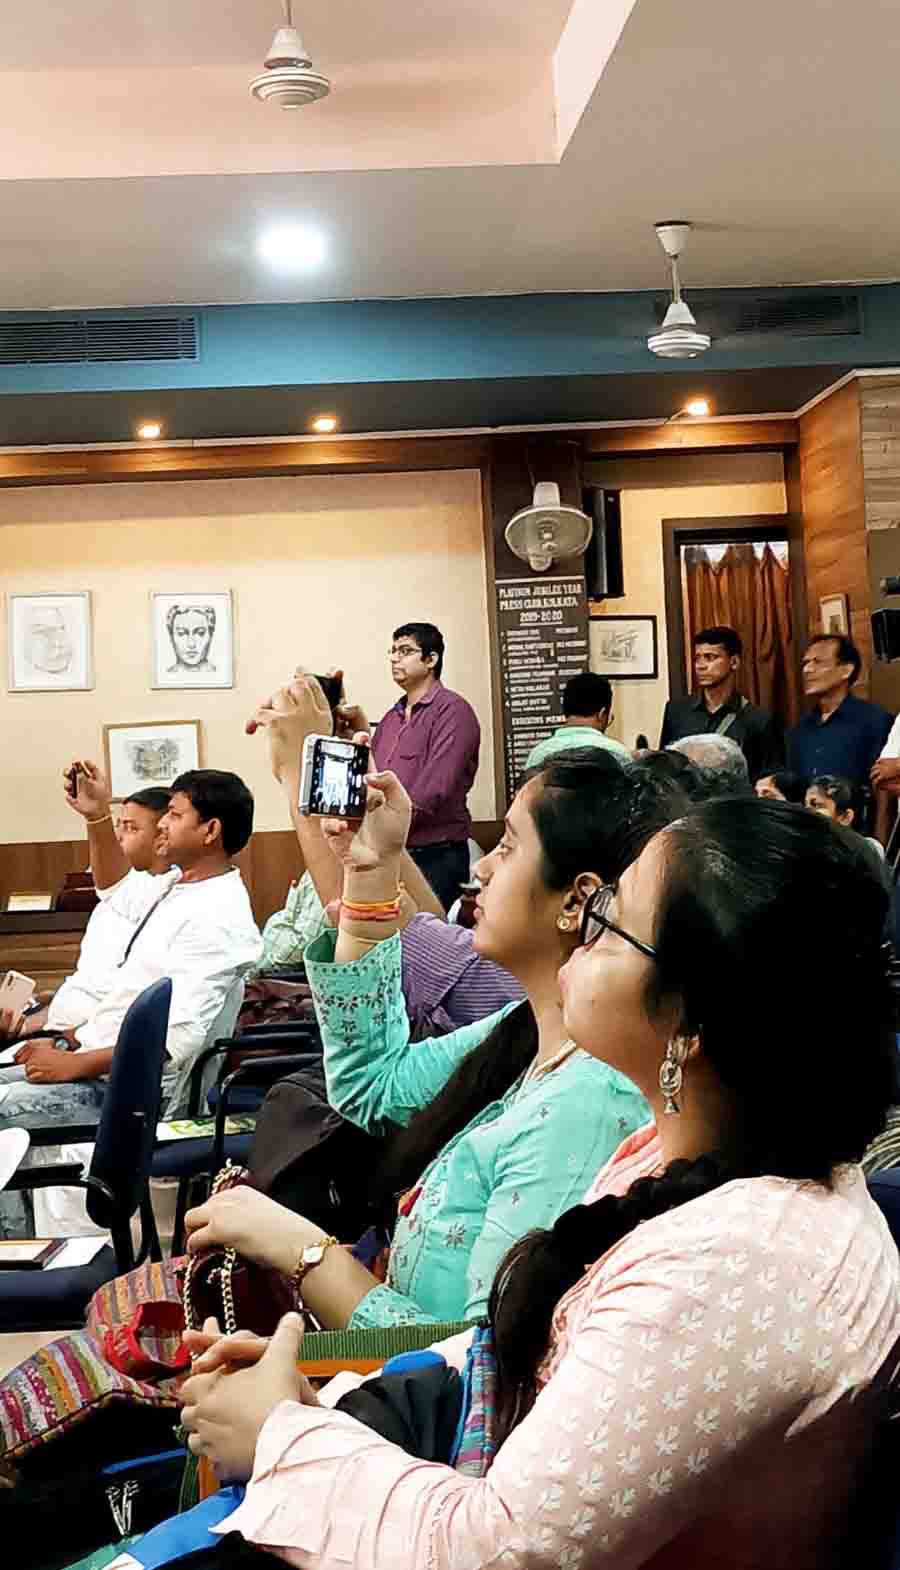 The audience capture moments of the event in which mayor Firhad Hakim  formally launched work on a climate action plan for Kolkata, which would work towards making the city cleaner and greener